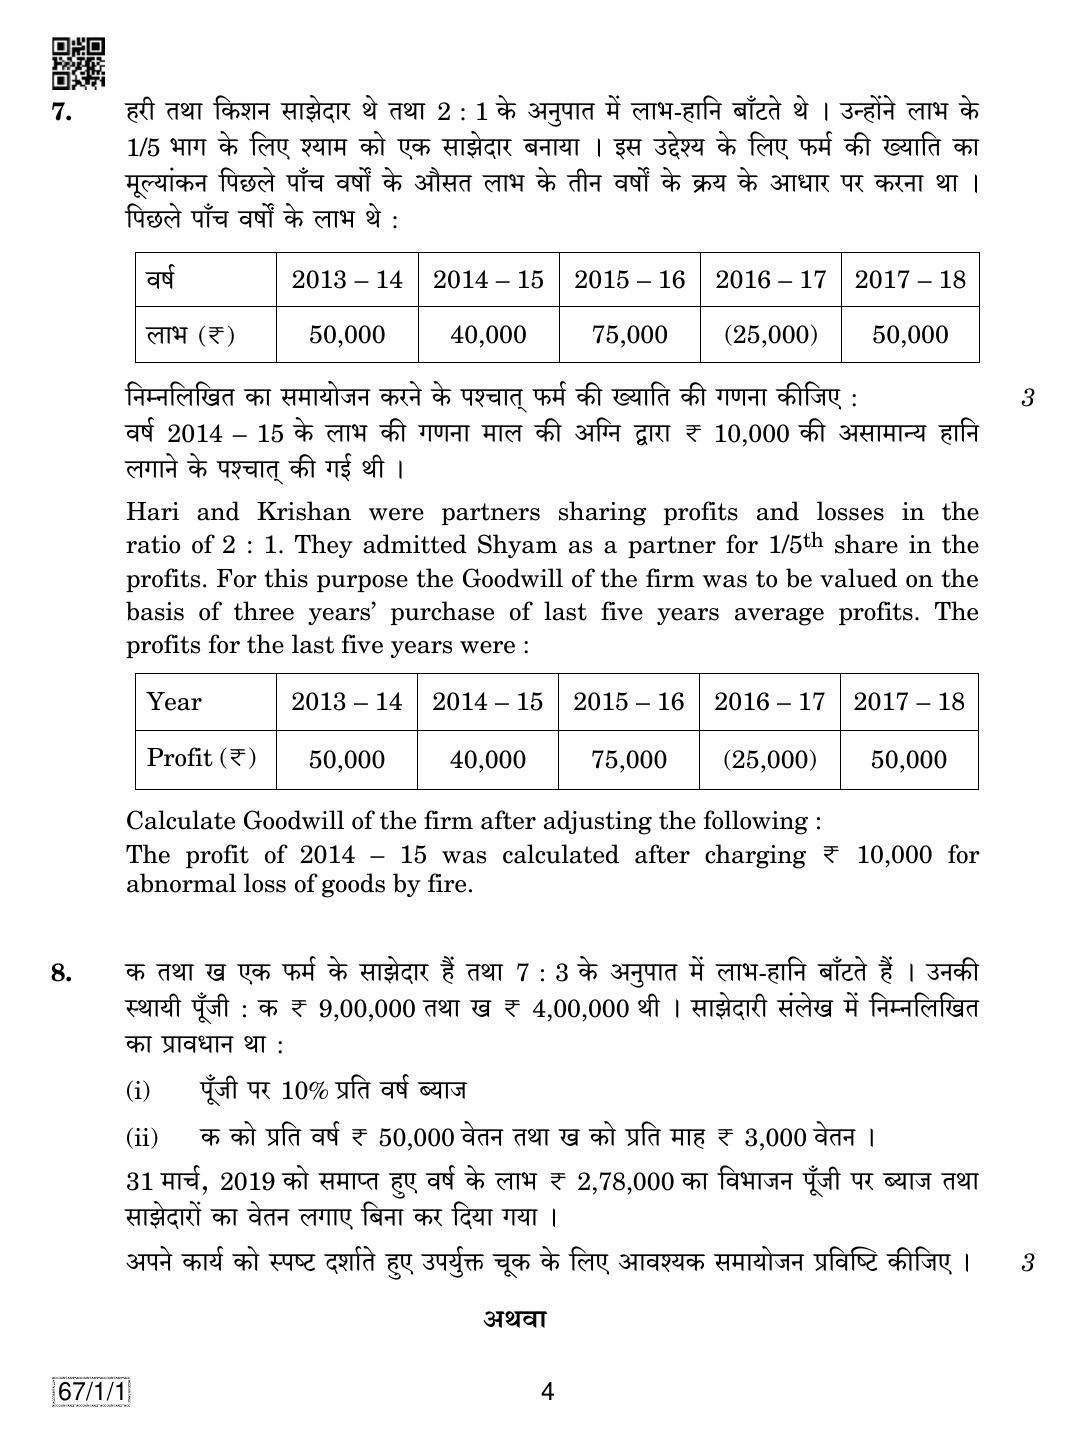 CBSE Class 12 67-1-1 ACCOUNTANCY 2019 Compartment Question Paper - Page 4